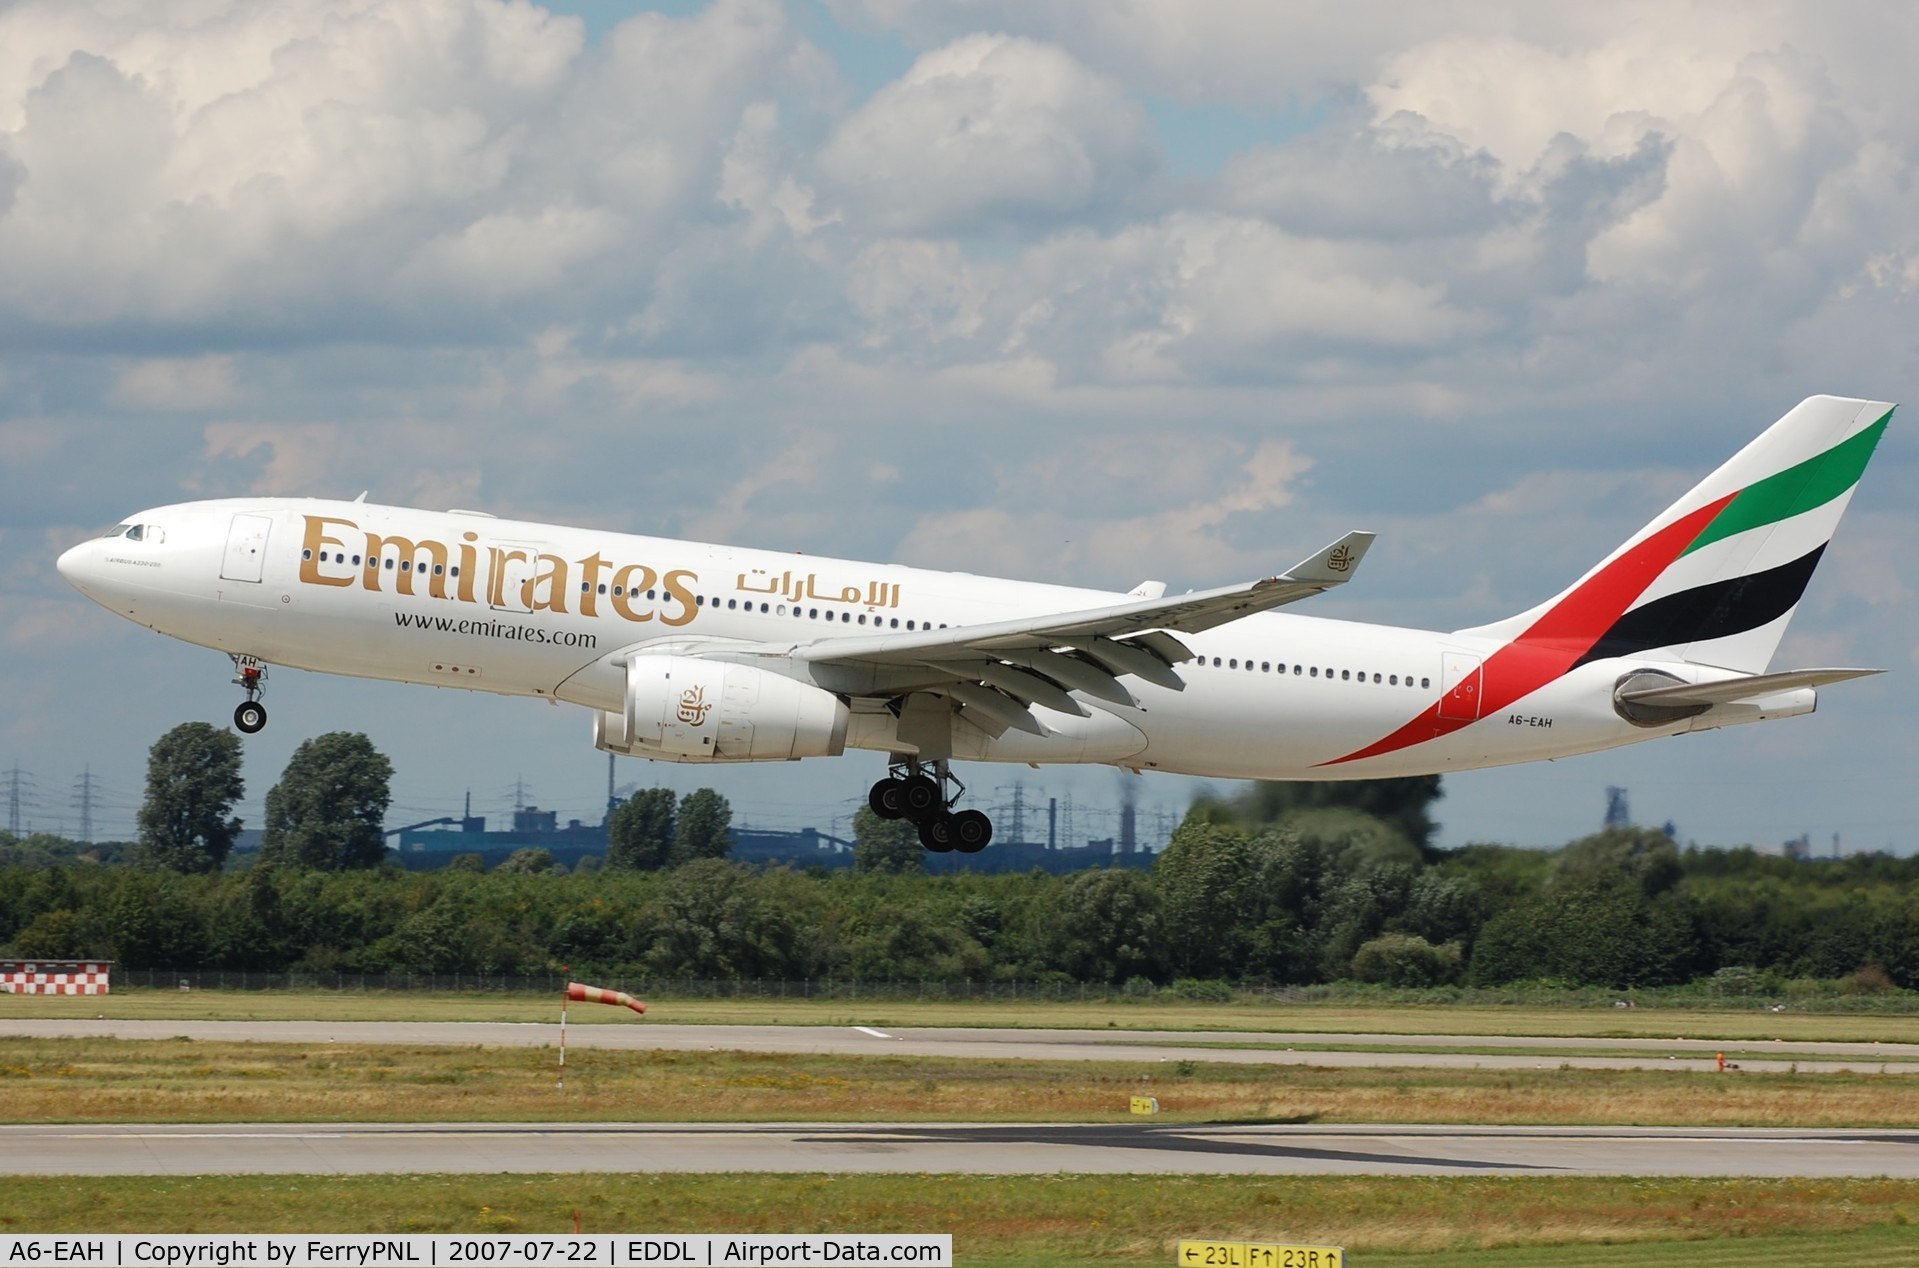 A6-EAH, 2001 Airbus A330-243 C/N 409, Landing of Emirates A332